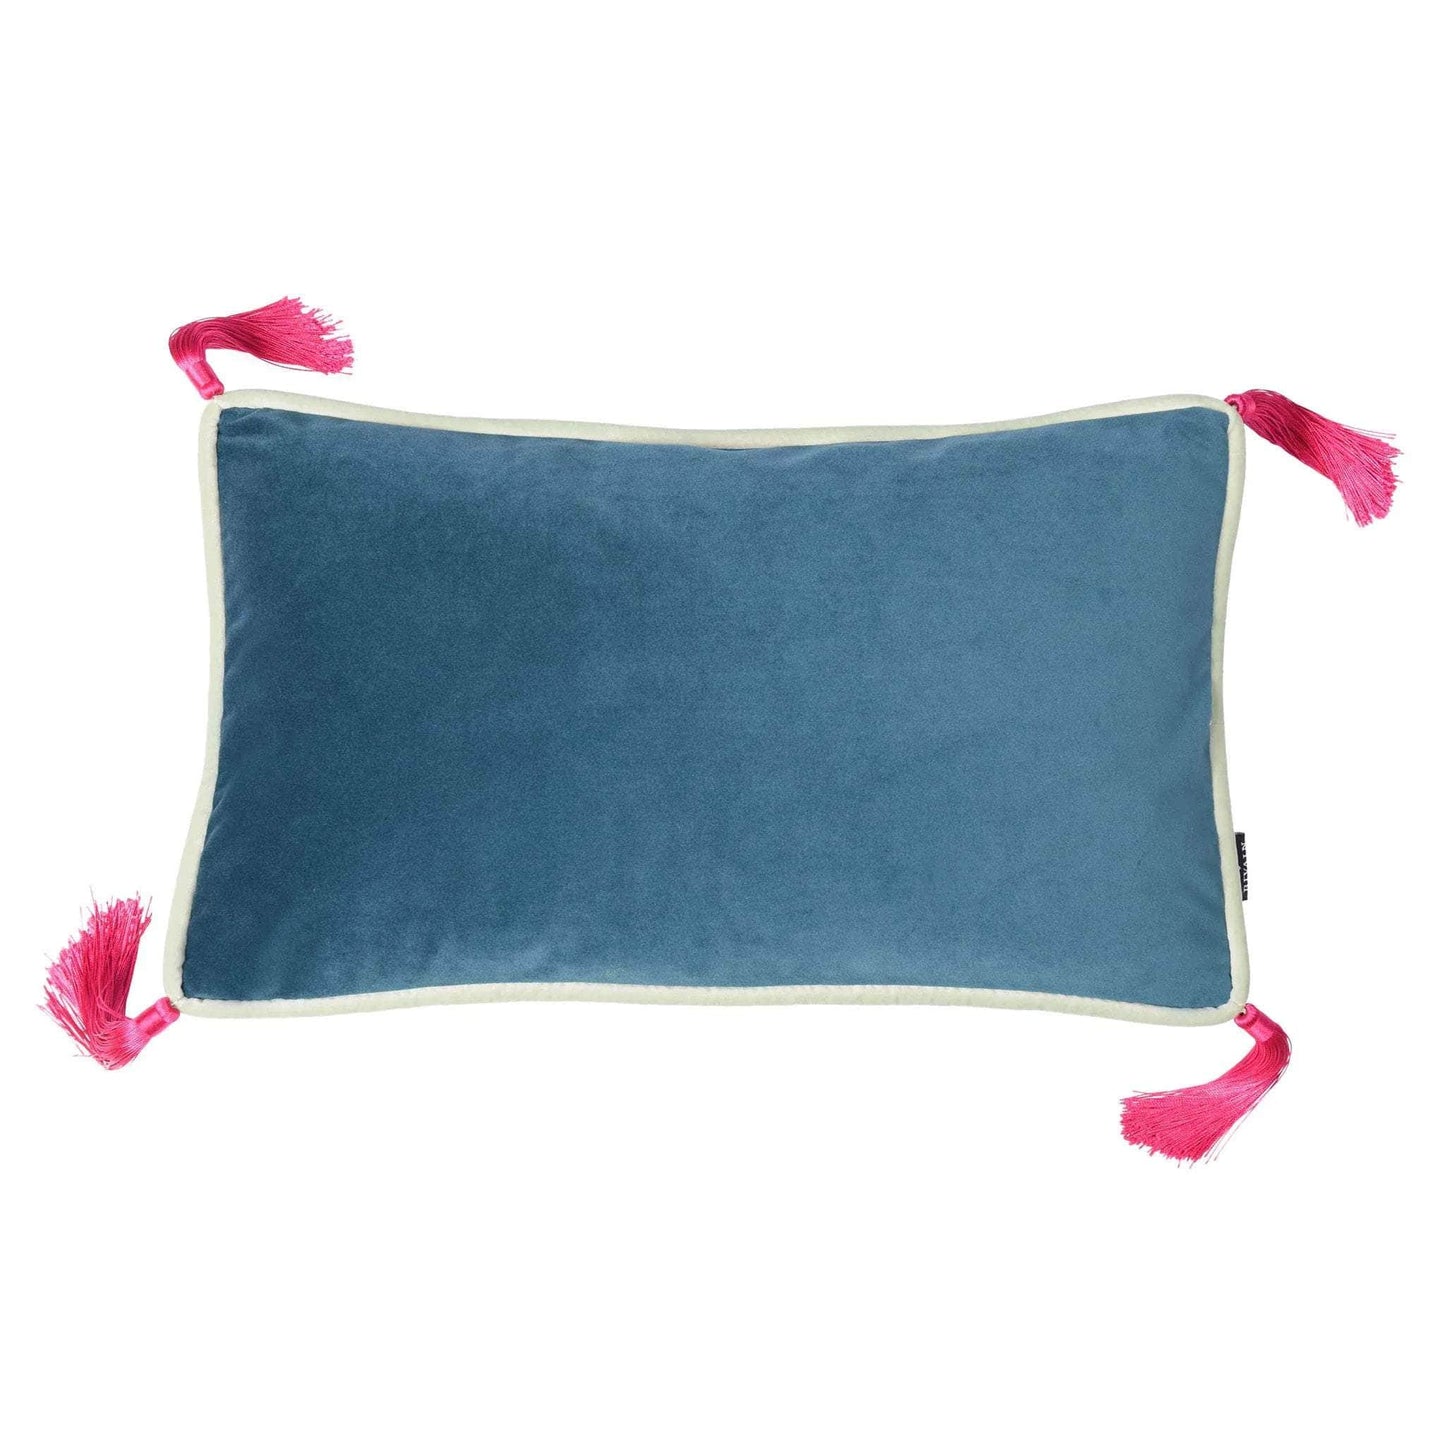 Teal velvet rectangular cushion with mint piping and fuschia tassels